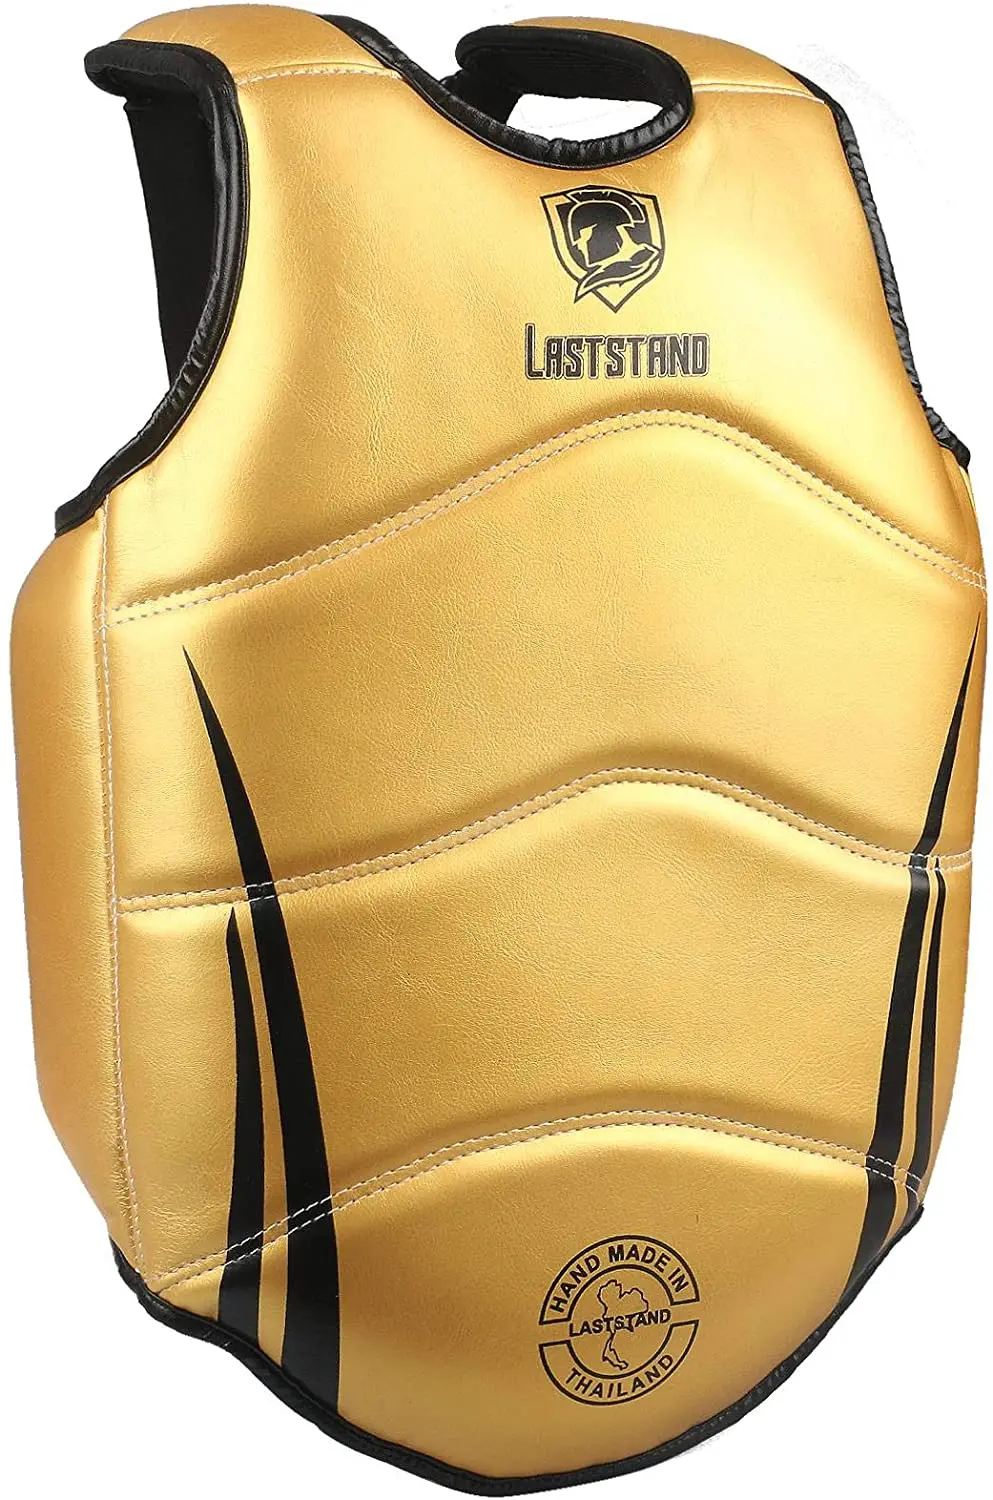 LASTSTAND Chest Guard Boxing Body Protector Kickboxing Martial Arts Muay Thai MMA Armour 